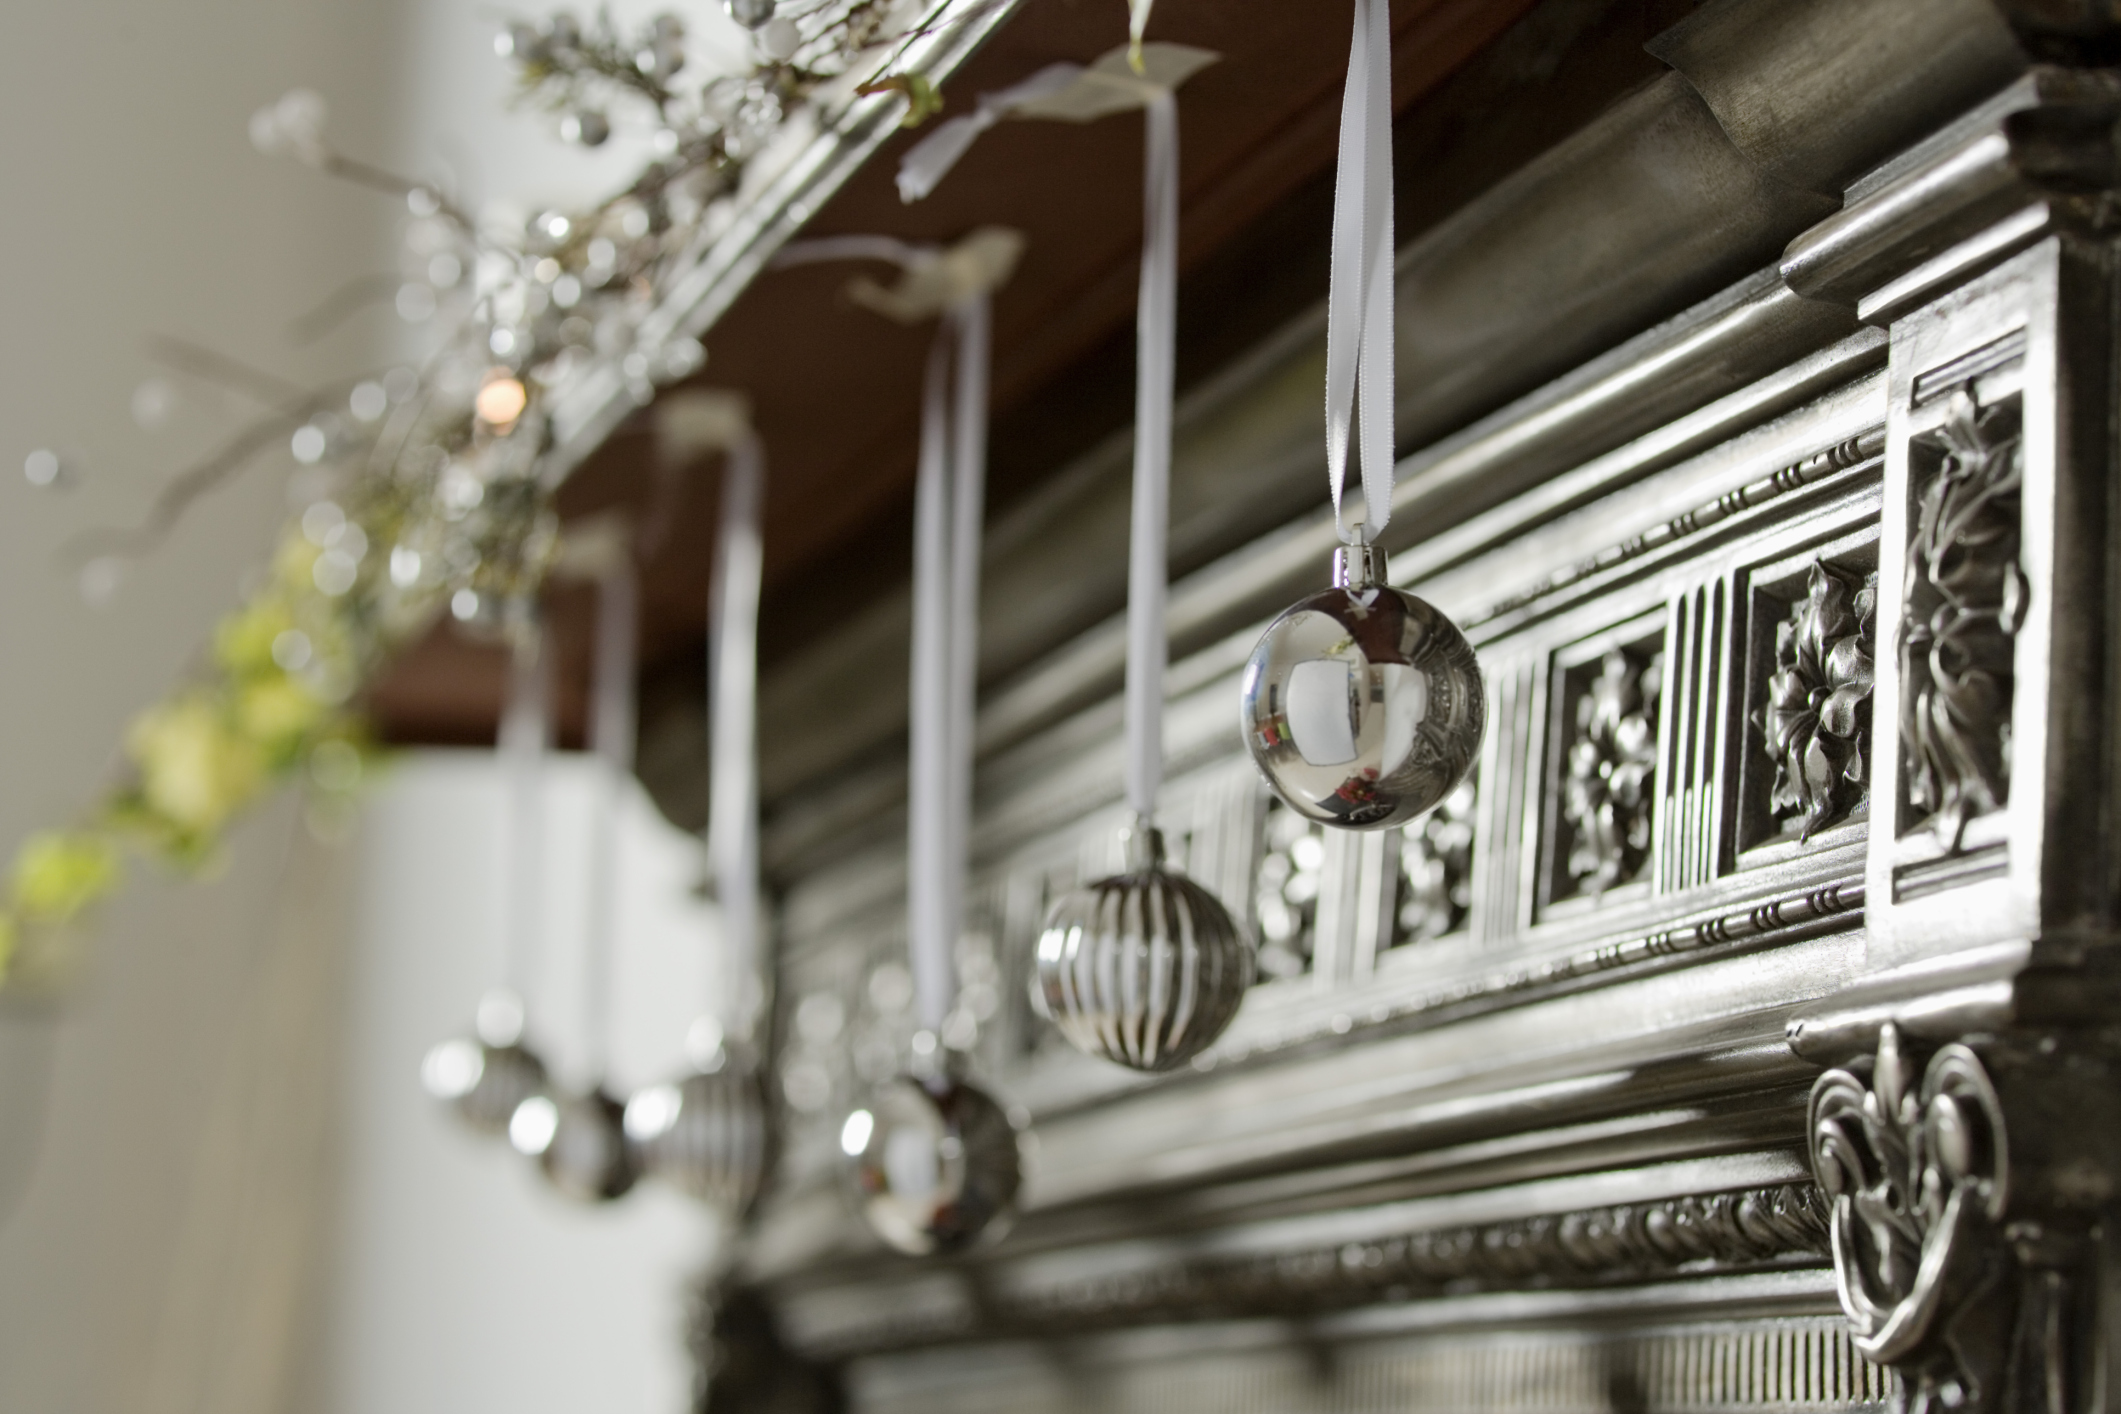 Ornaments hanging from mantel